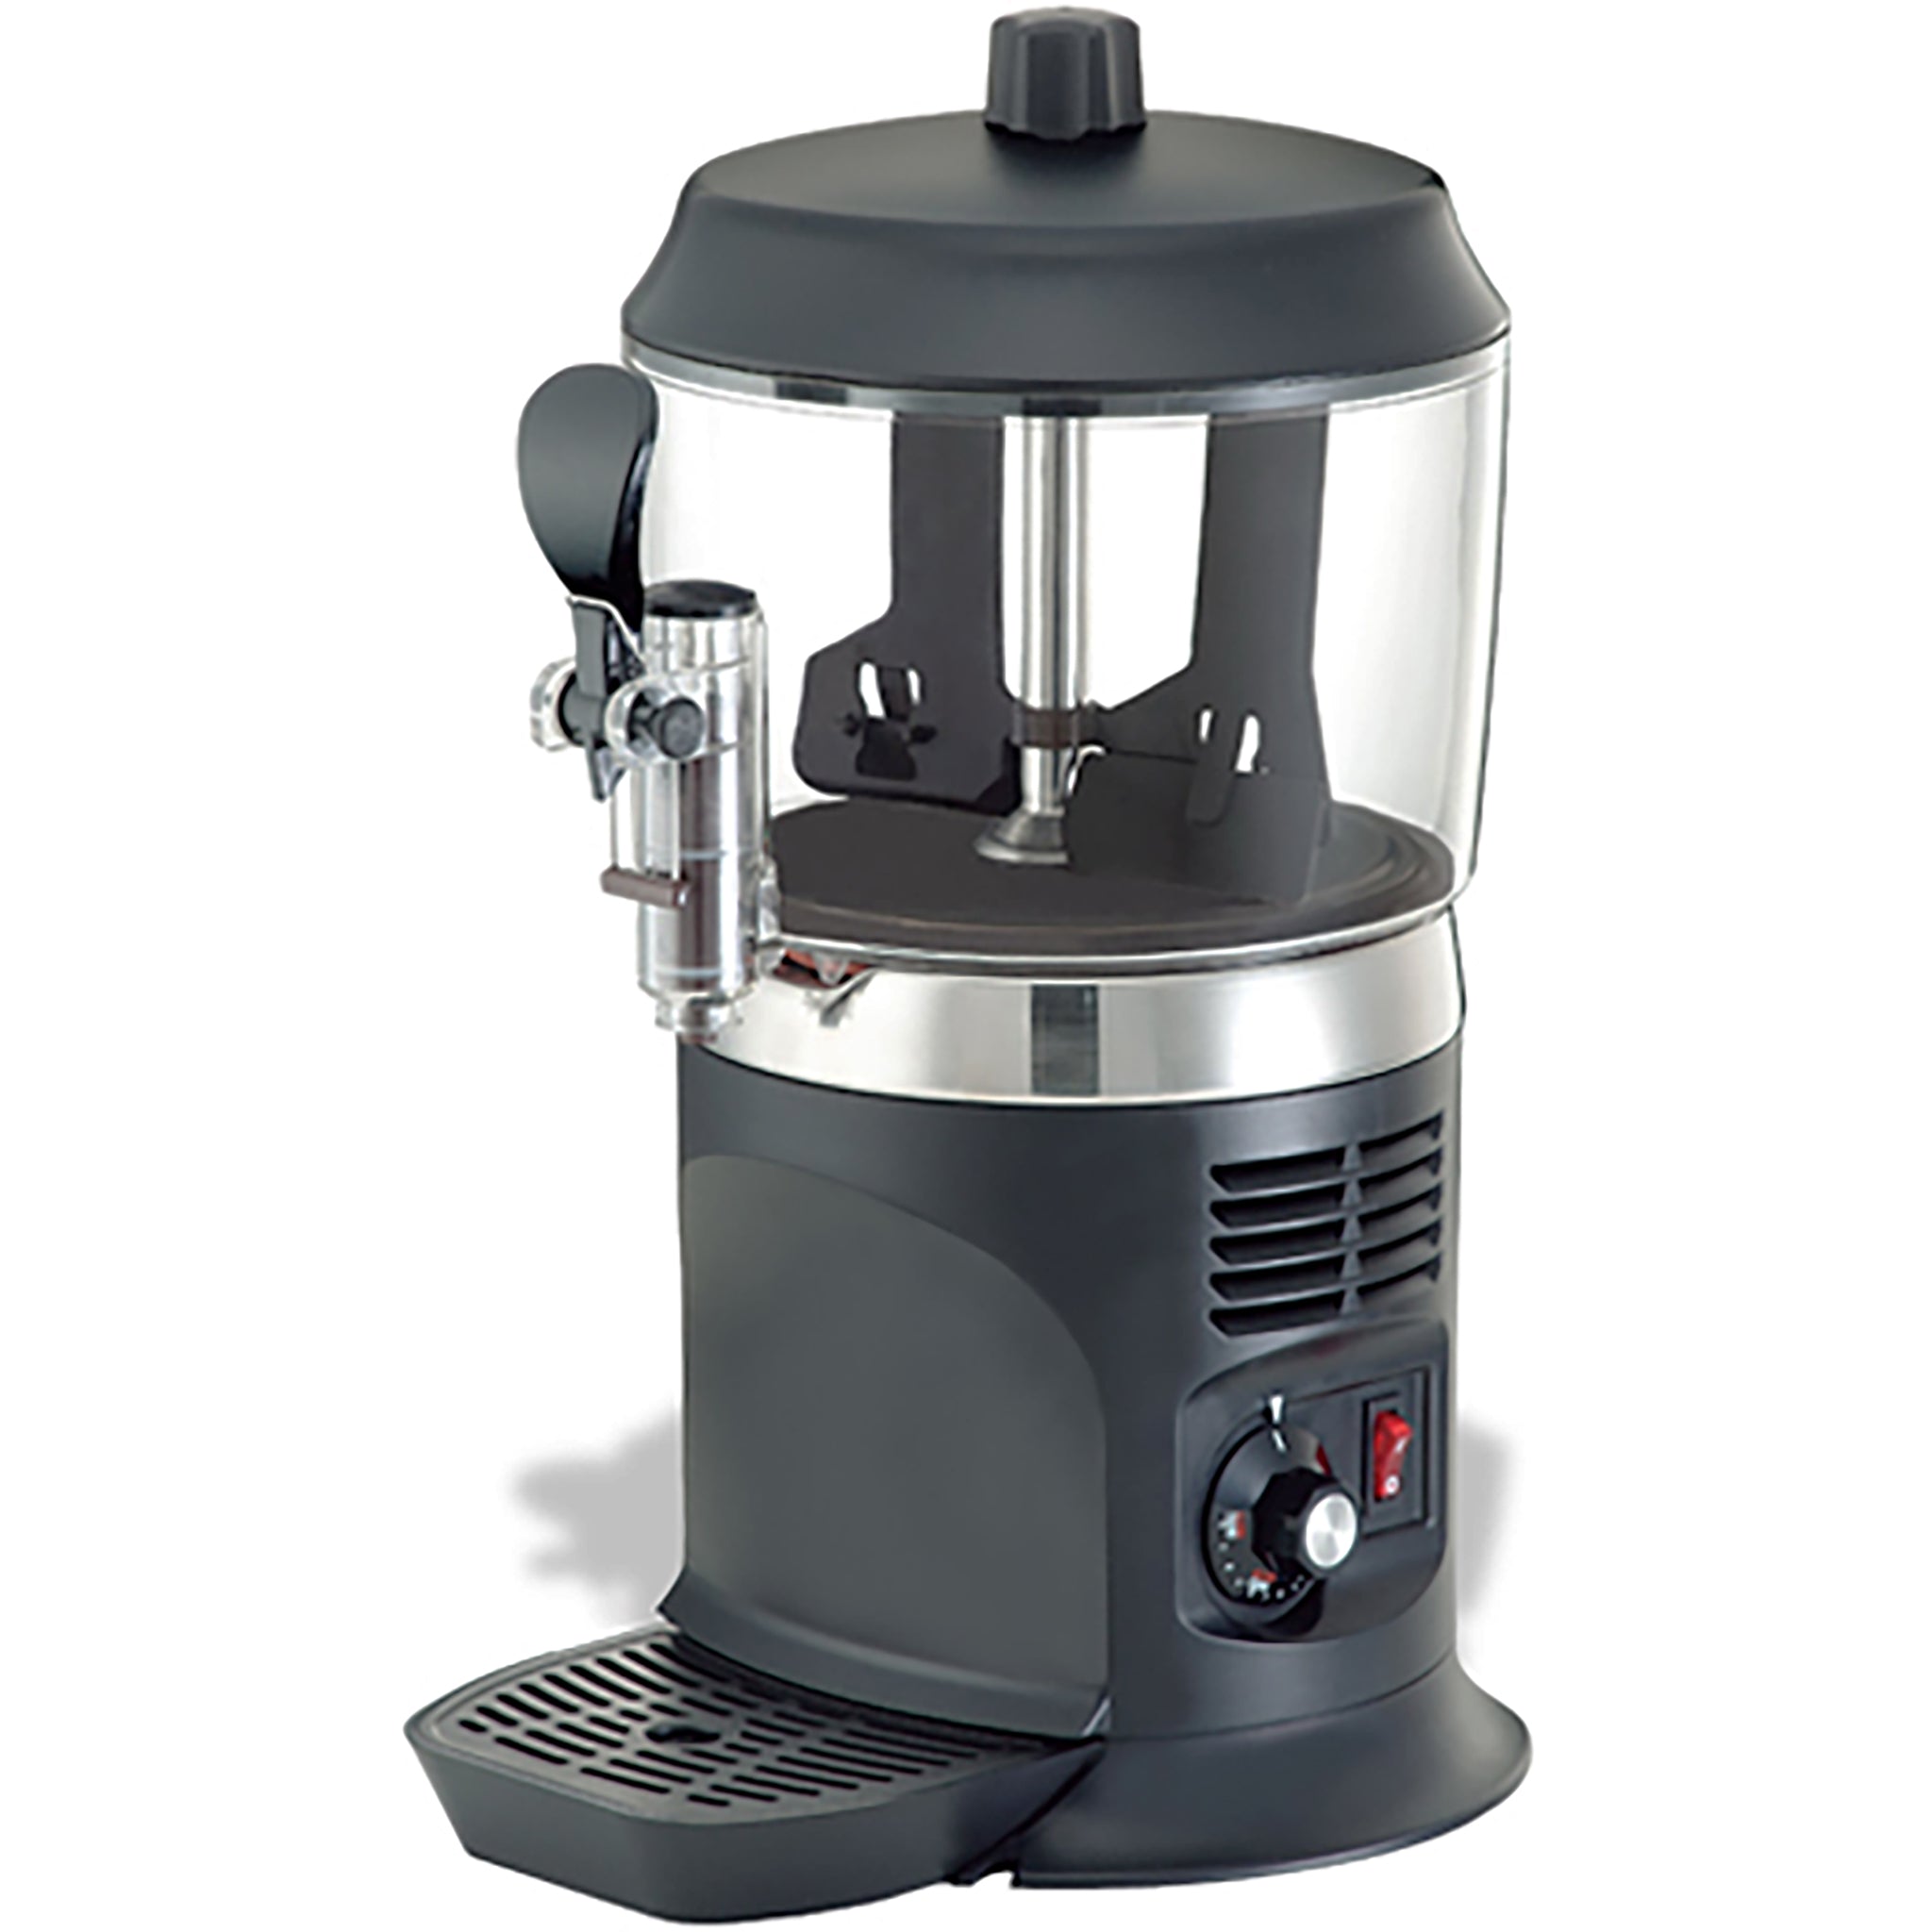 NEW 10L Commercial Hot Chocolate Machine Maker Beverage Warmer